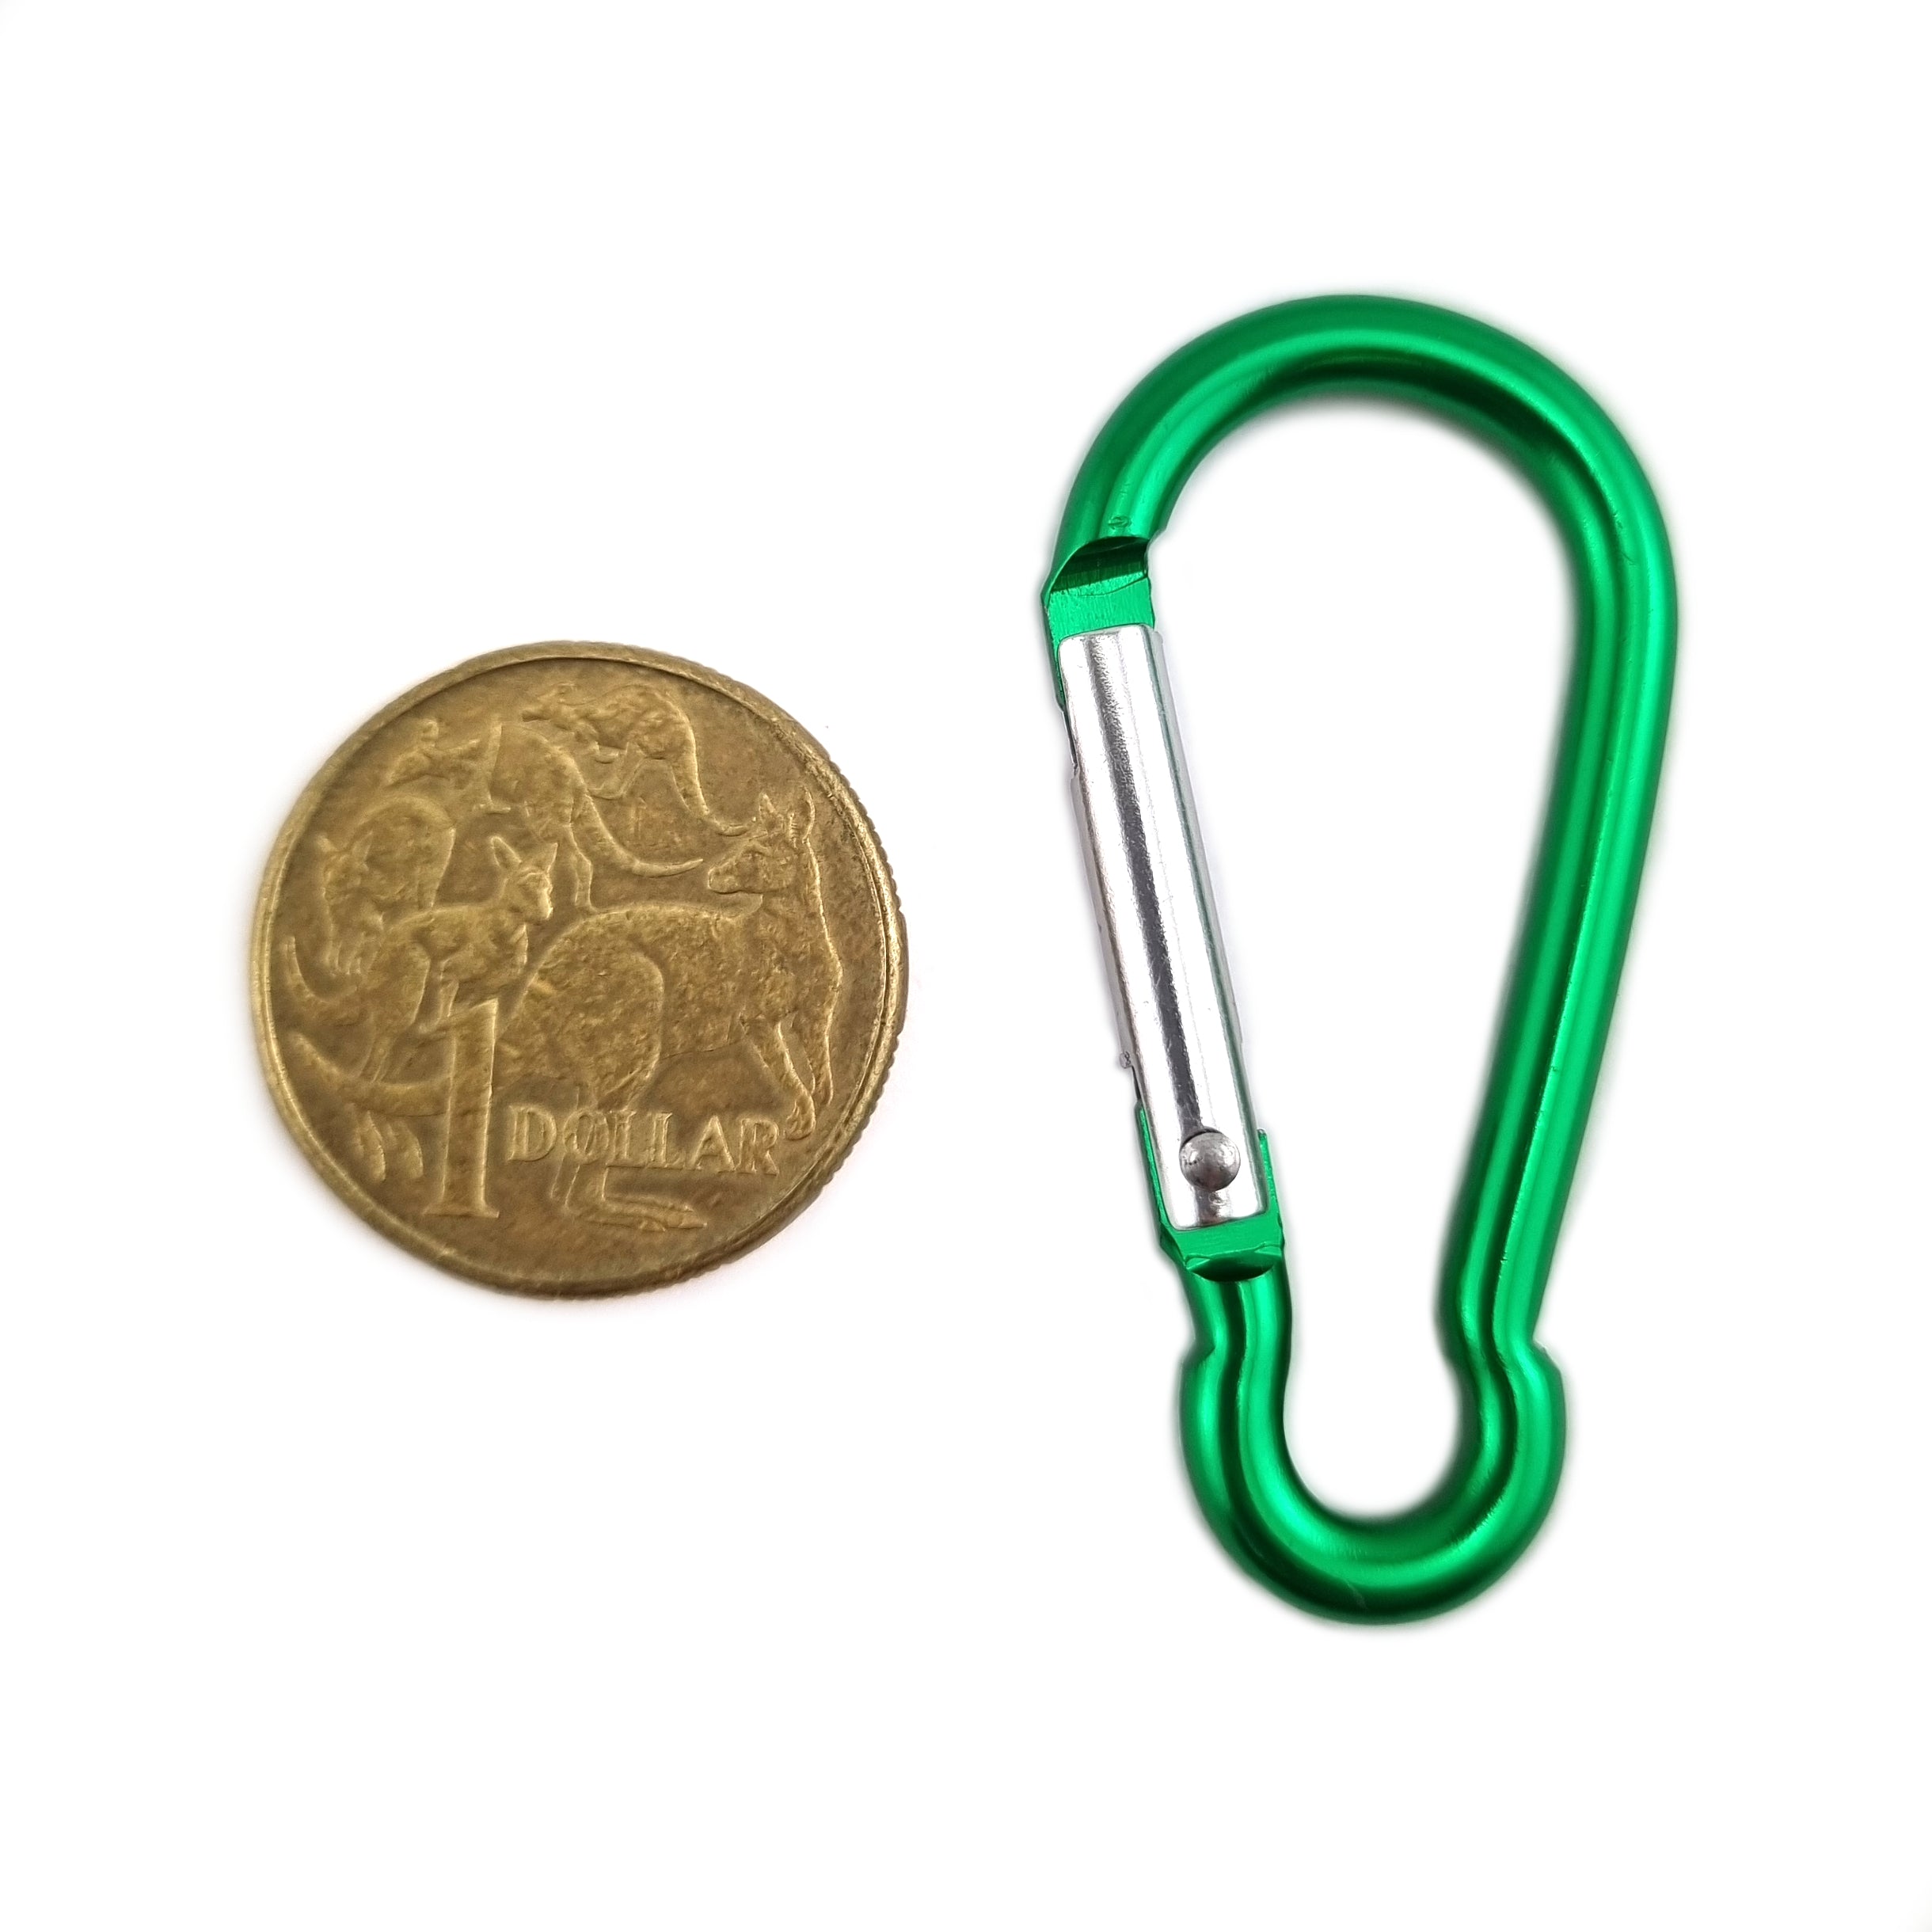 Aluminium snap hook in green, size 4mm, untested. Shop hardware online chain.com.au